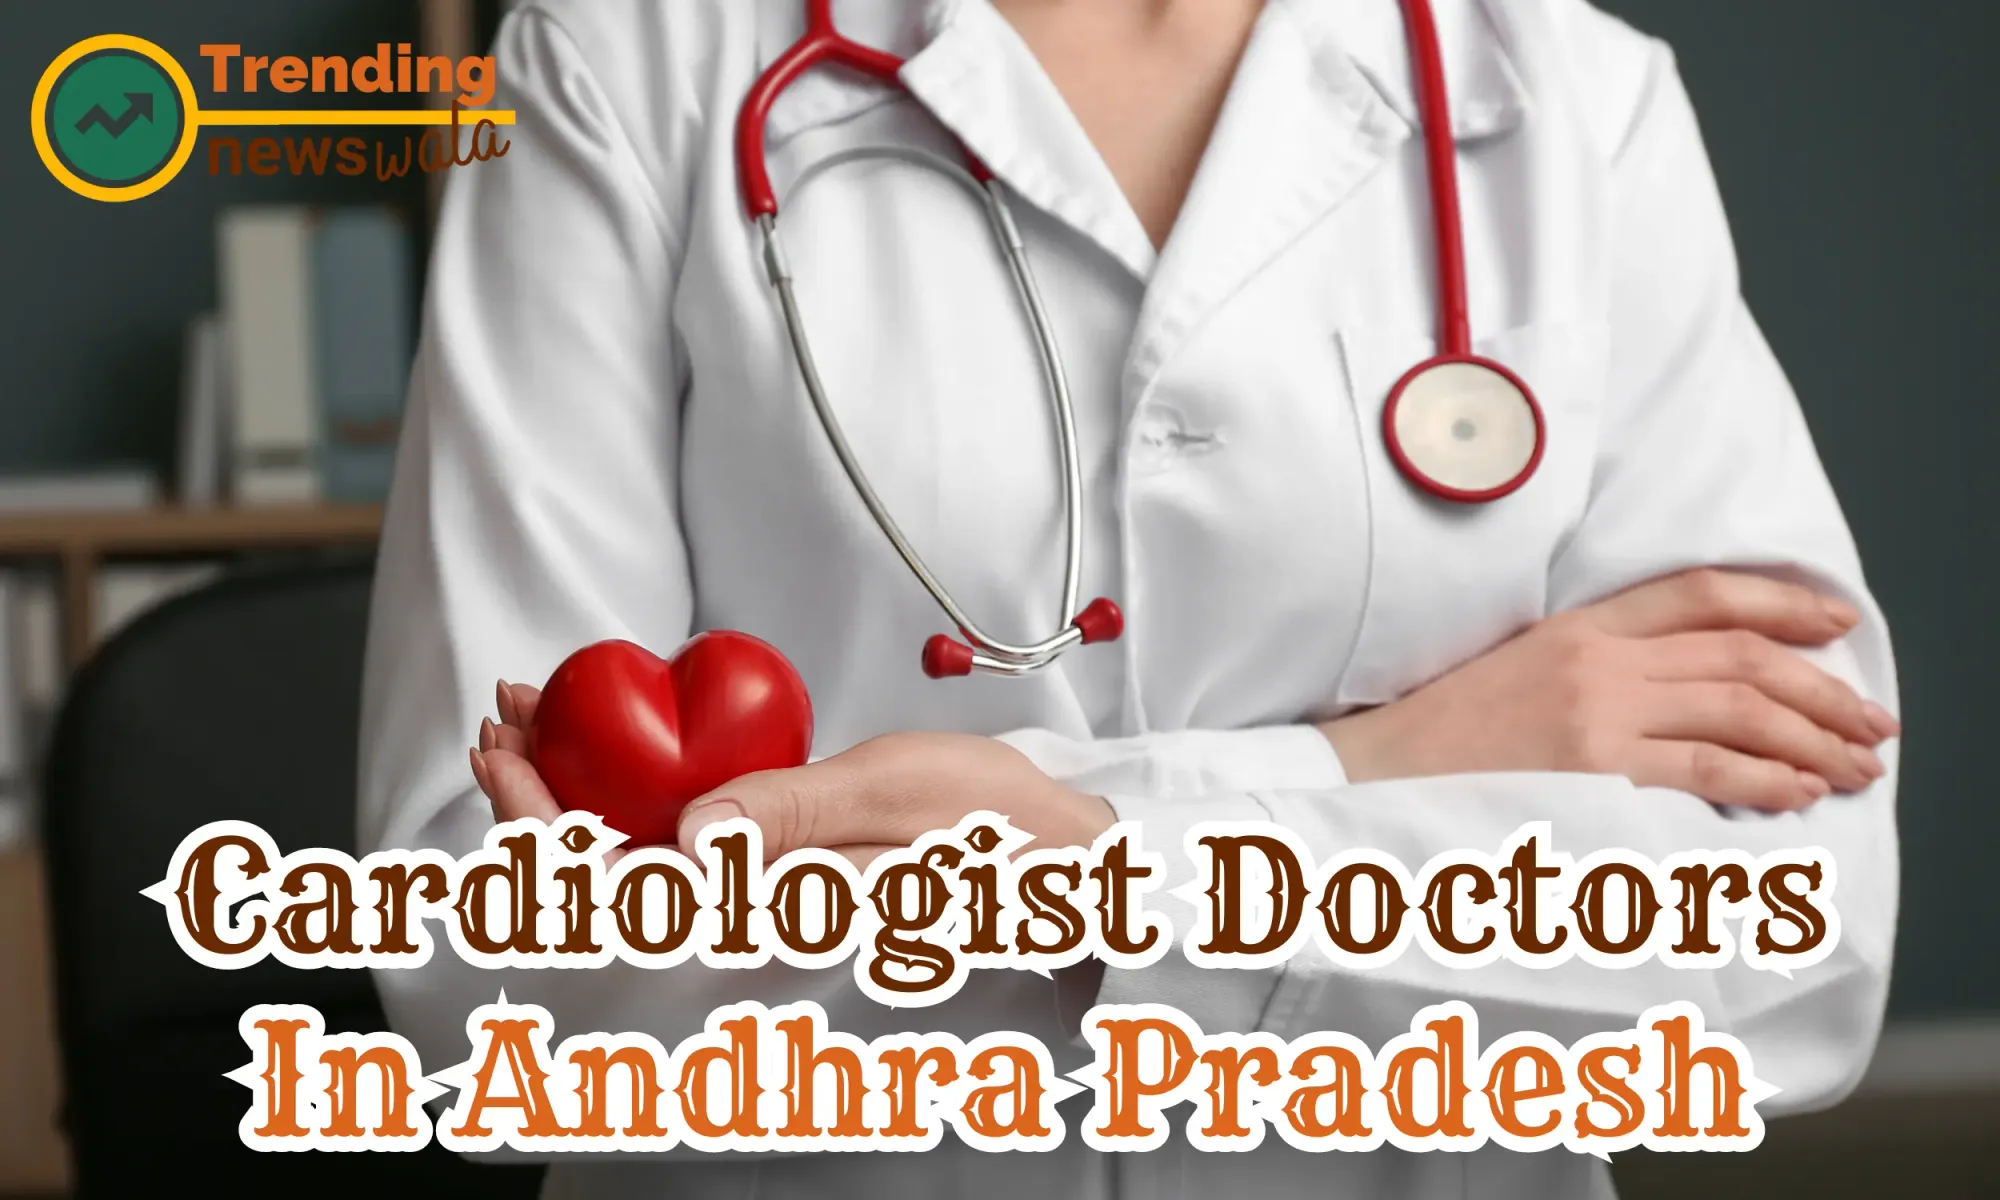 Cardiologists in Andhra Pradesh